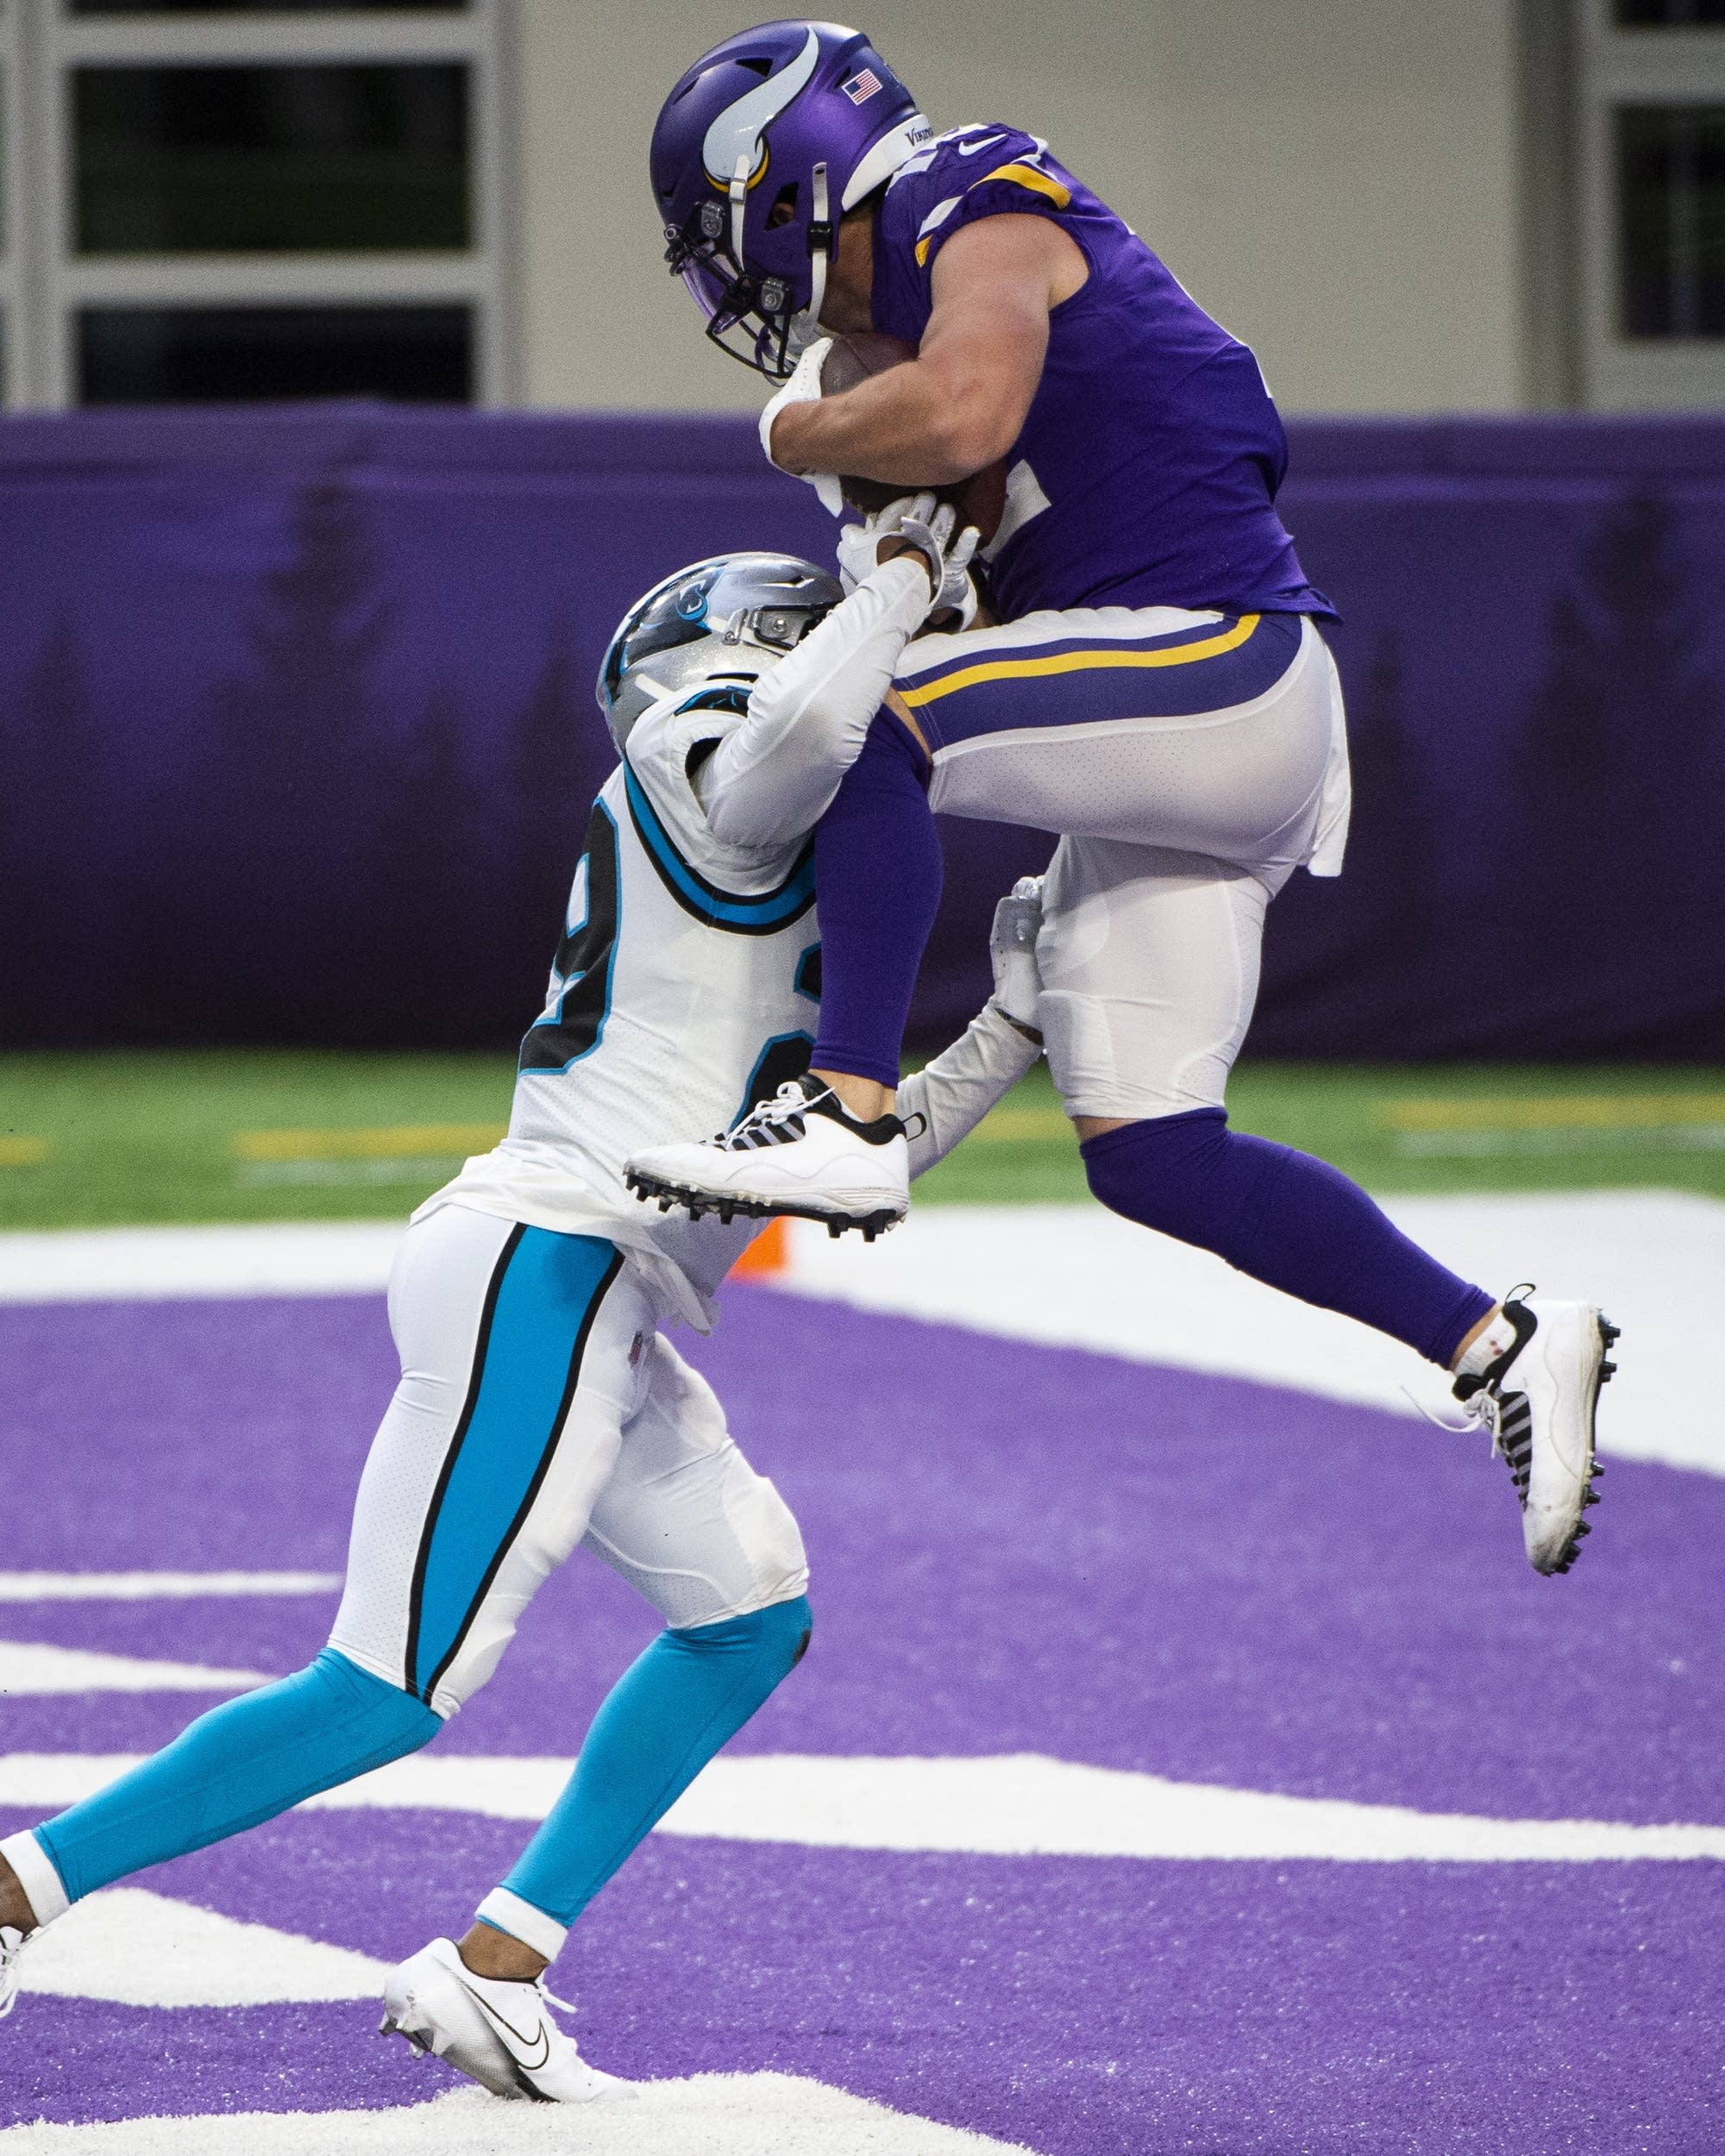 2000x2500 Beebe amends for fumble with TD as Vikings beat Panthers | MPR News